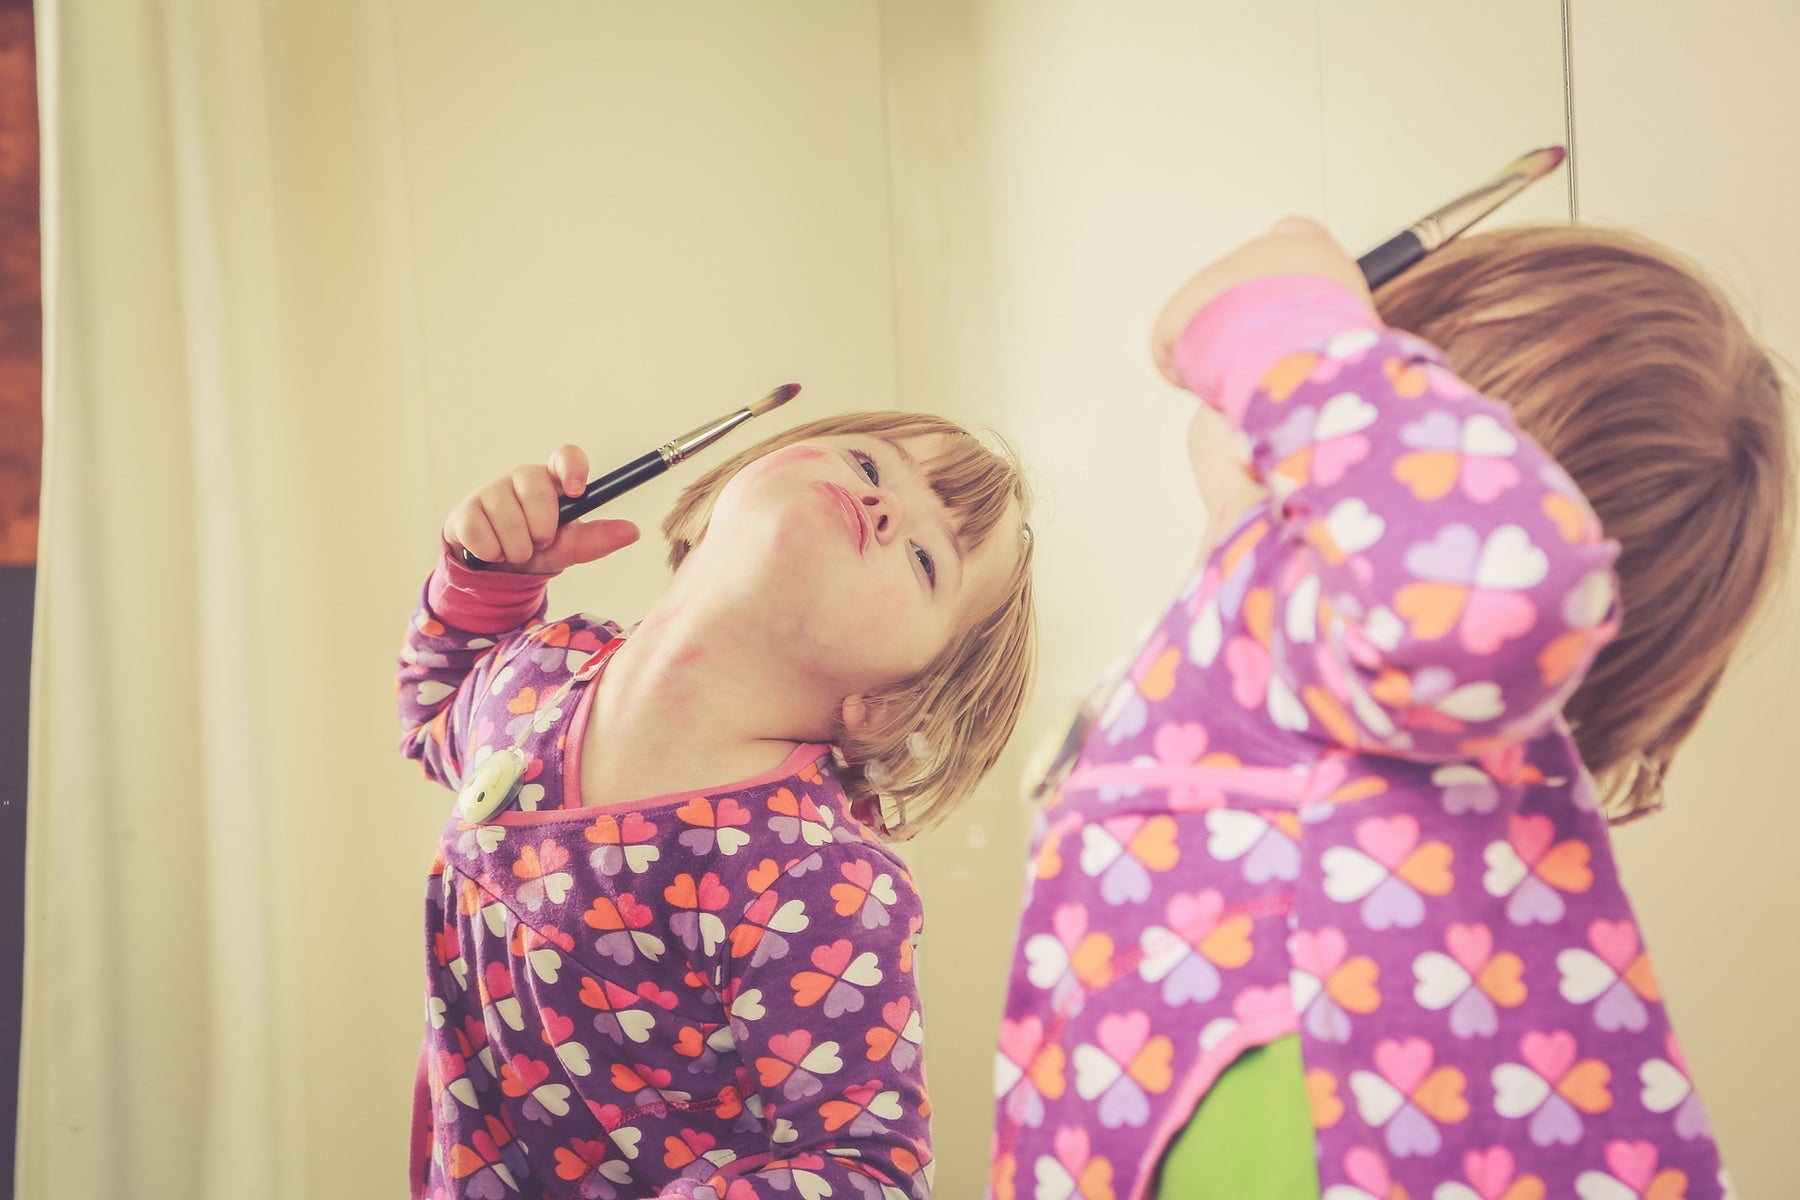 Girl in pajamas making faces in the mirror